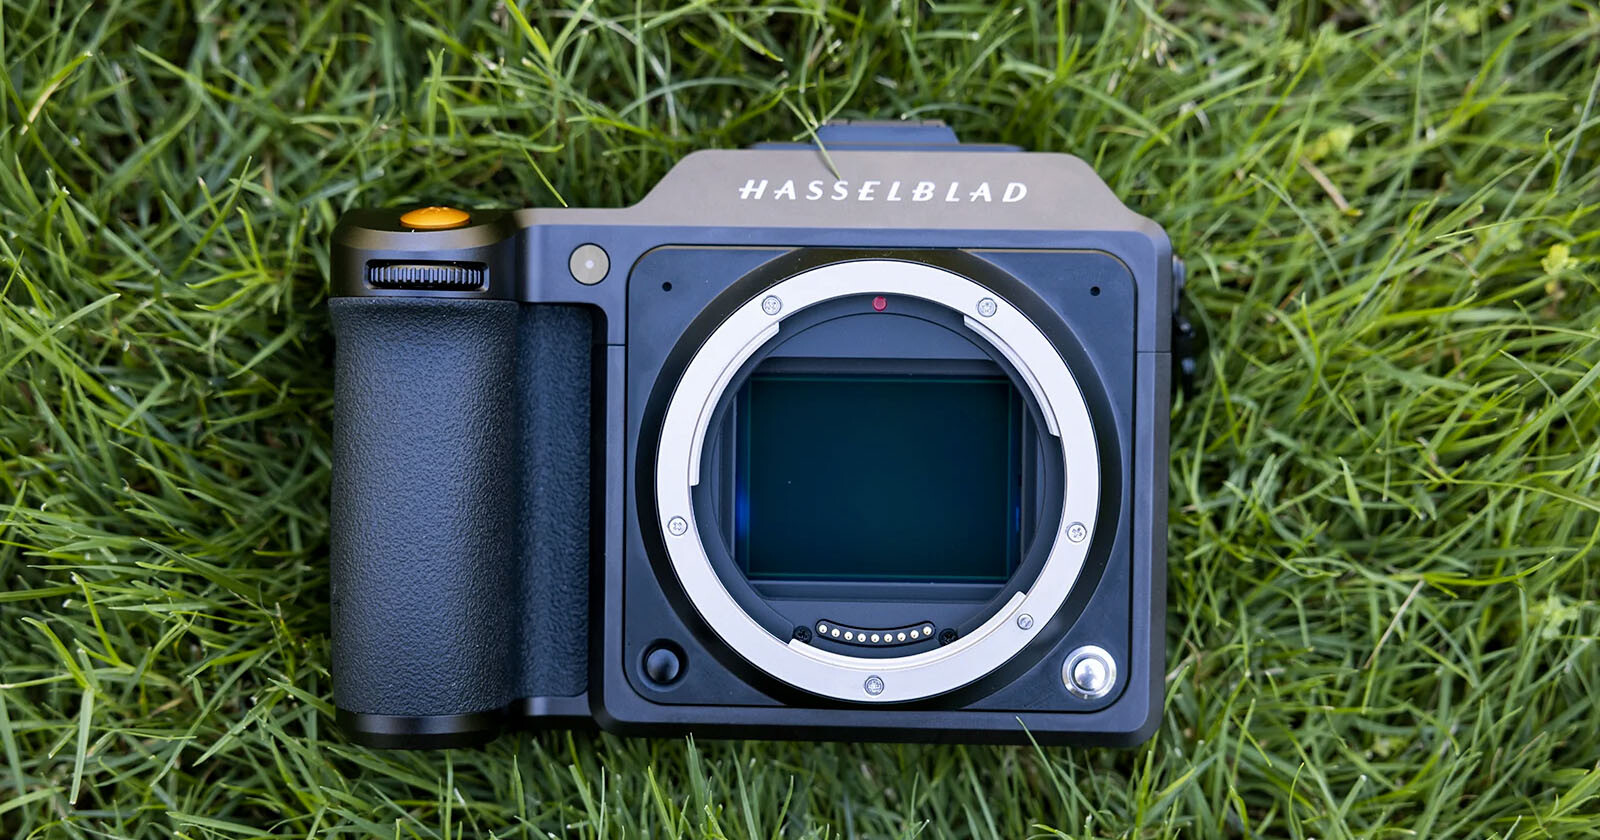  hasselblad x2d gets focus bracketing touch peaking 